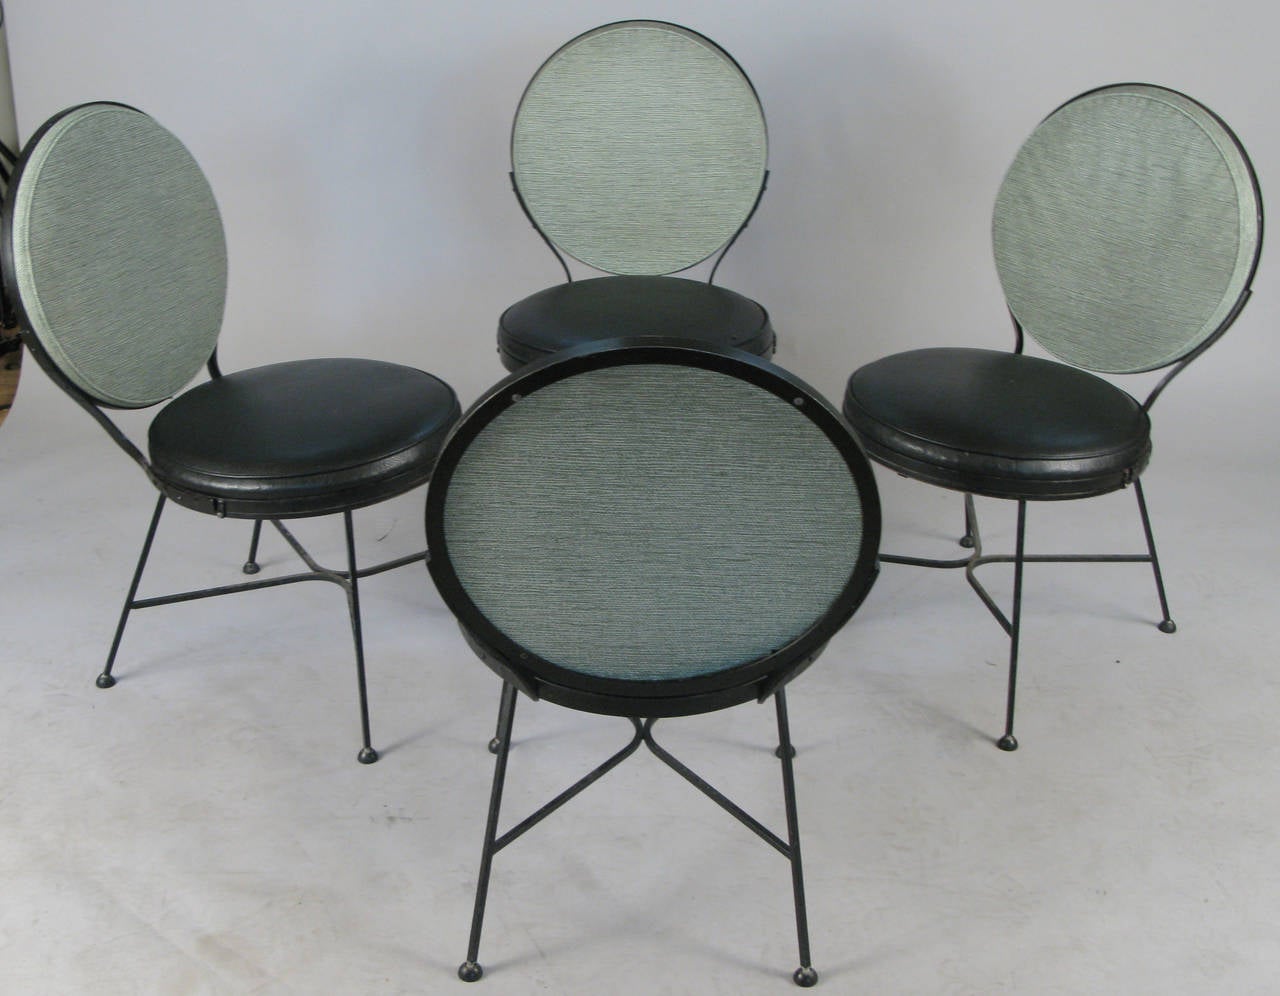 A set of four well-made and beautiful 1950s modern chairs by Troy Sunshade, with wrought iron frames and the original vinyl upholstery in black seats and pale mint green backs. Great design in excellent condition.